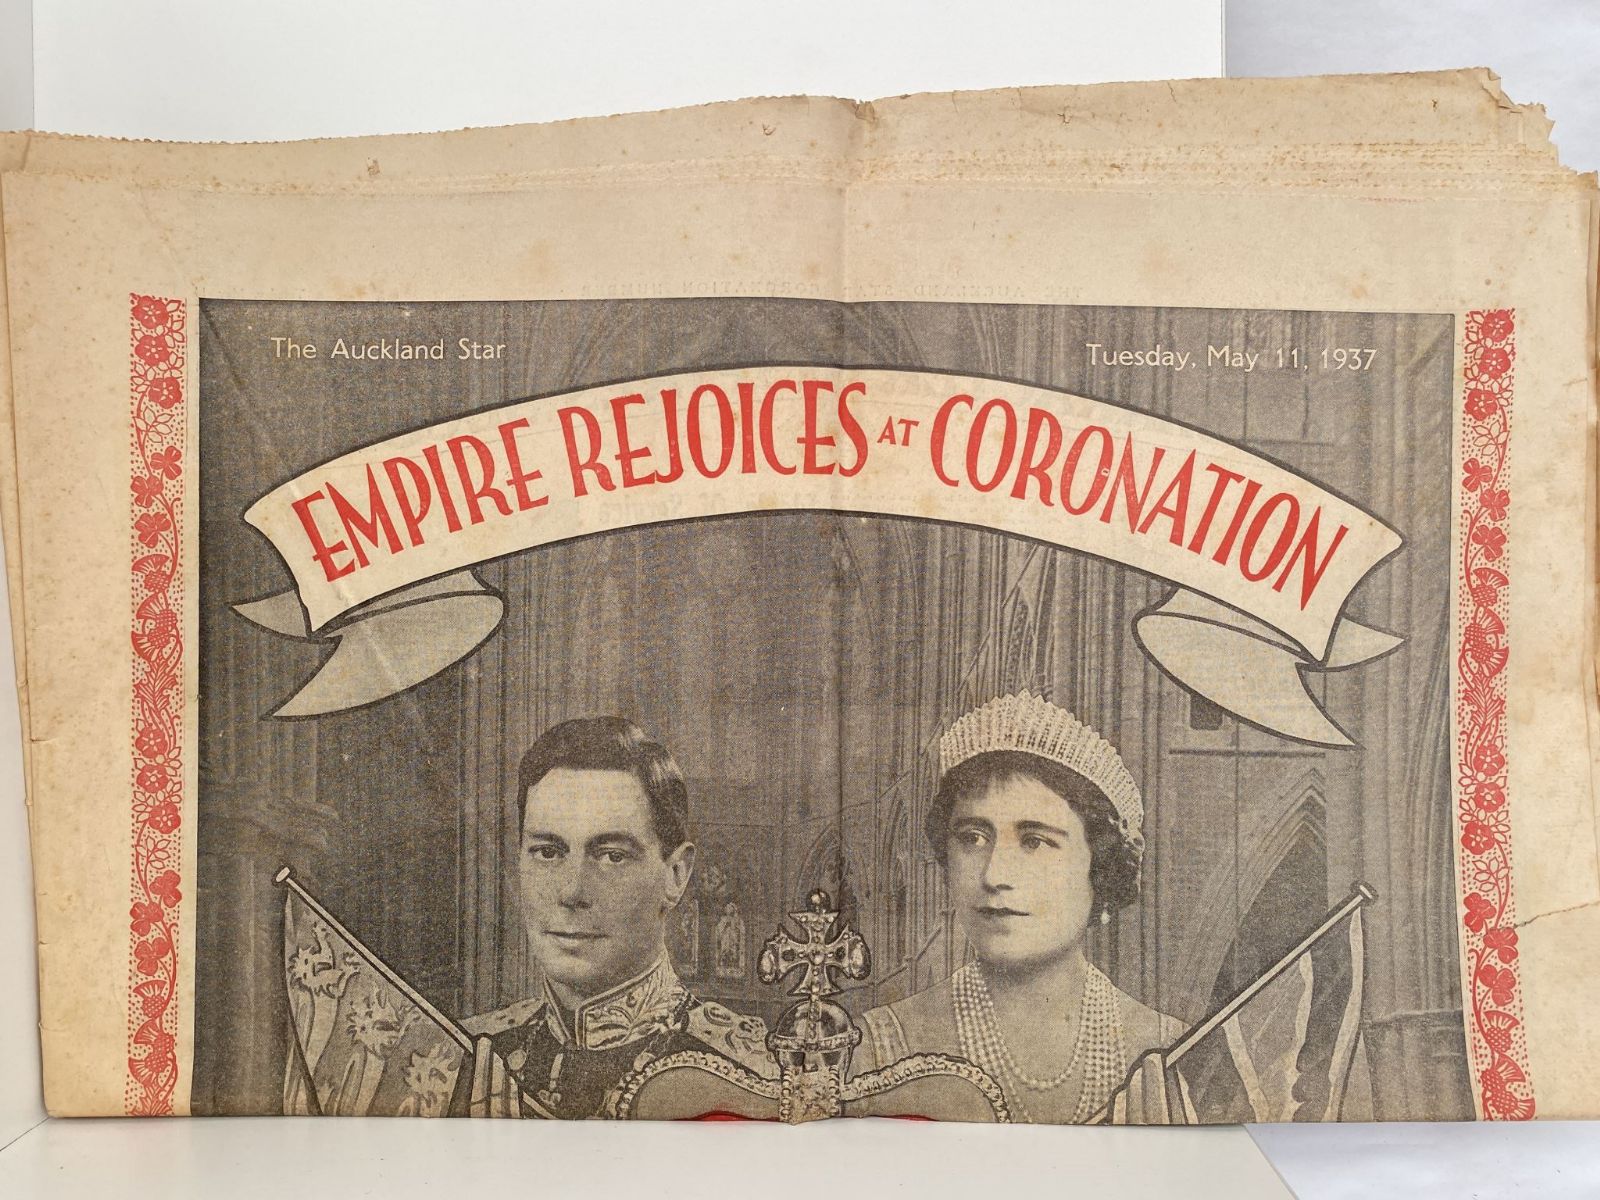 OLD NEWSPAPER: The Auckland Star - King George VI, Coronation Souvenir, May 1937